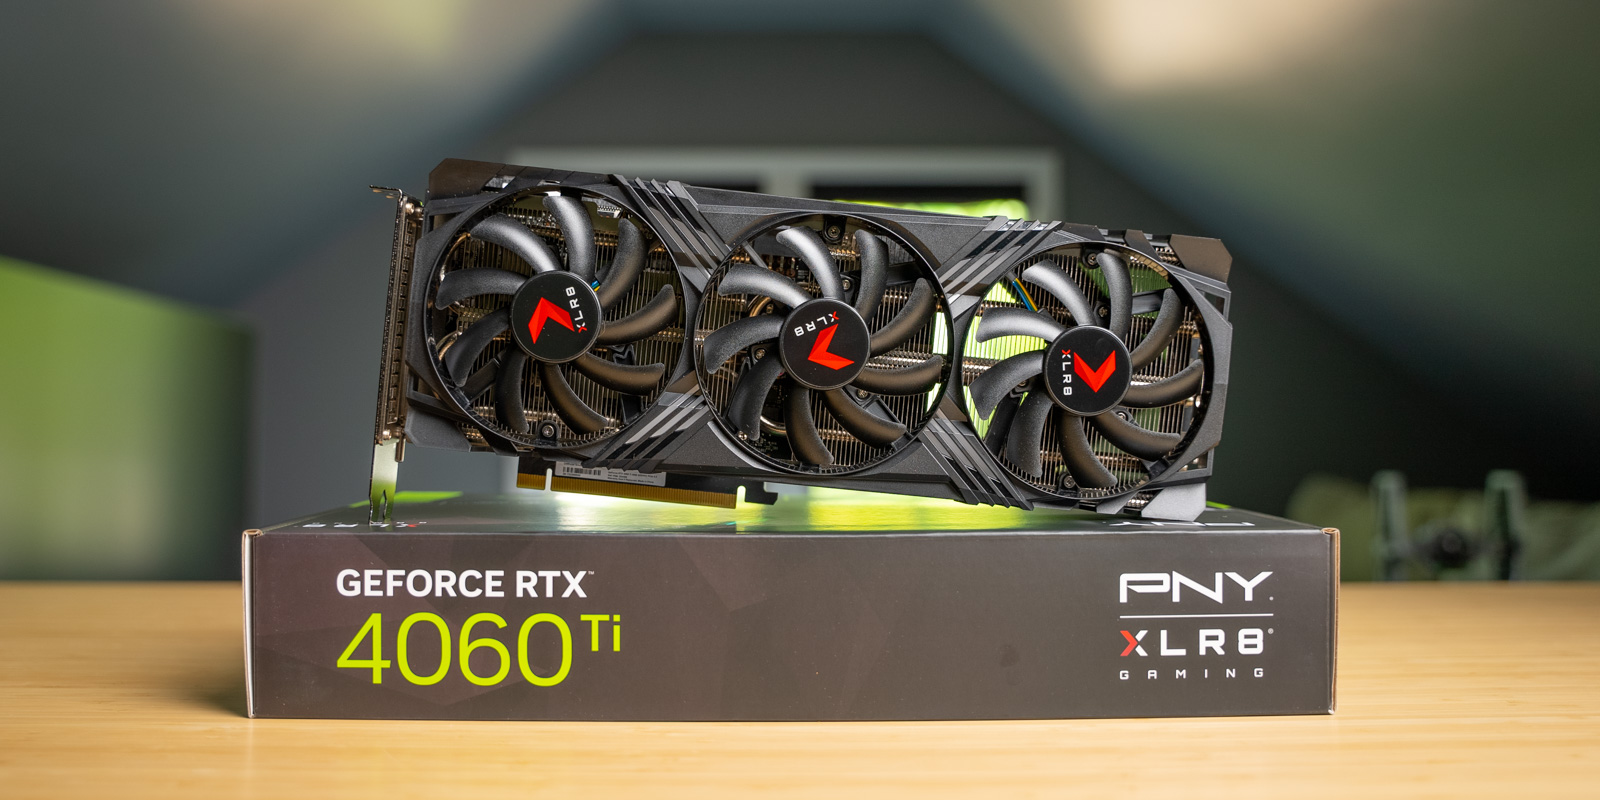 NVIDIA GeForce RTX 4060 8GB review